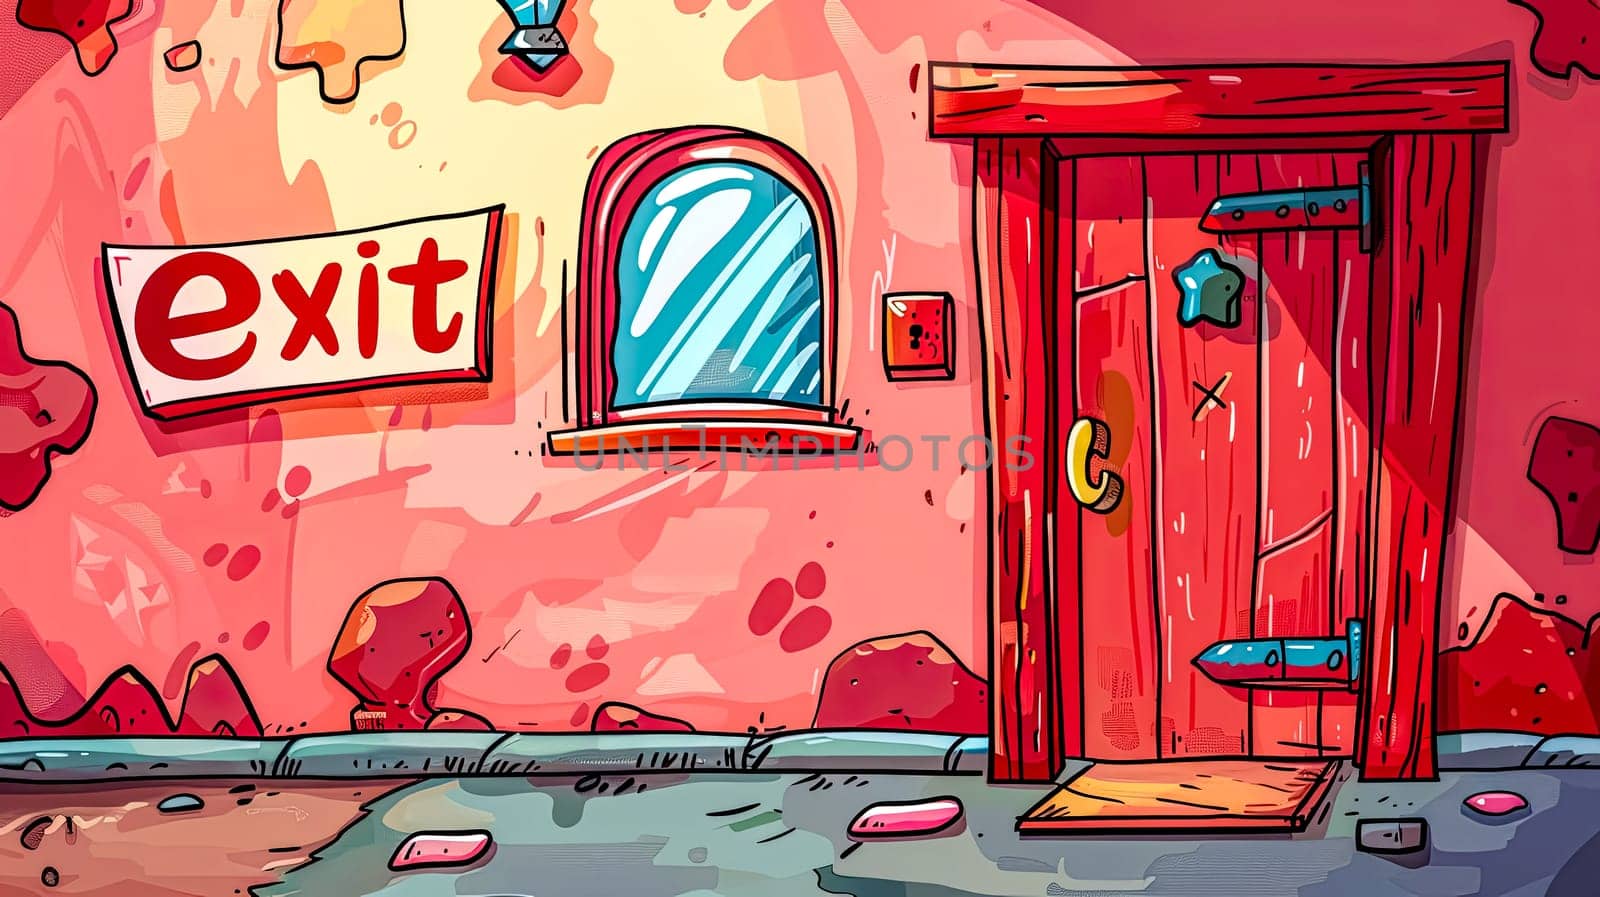 Illustration of a vibrant, cartoonish room with an exit sign above a whimsical door